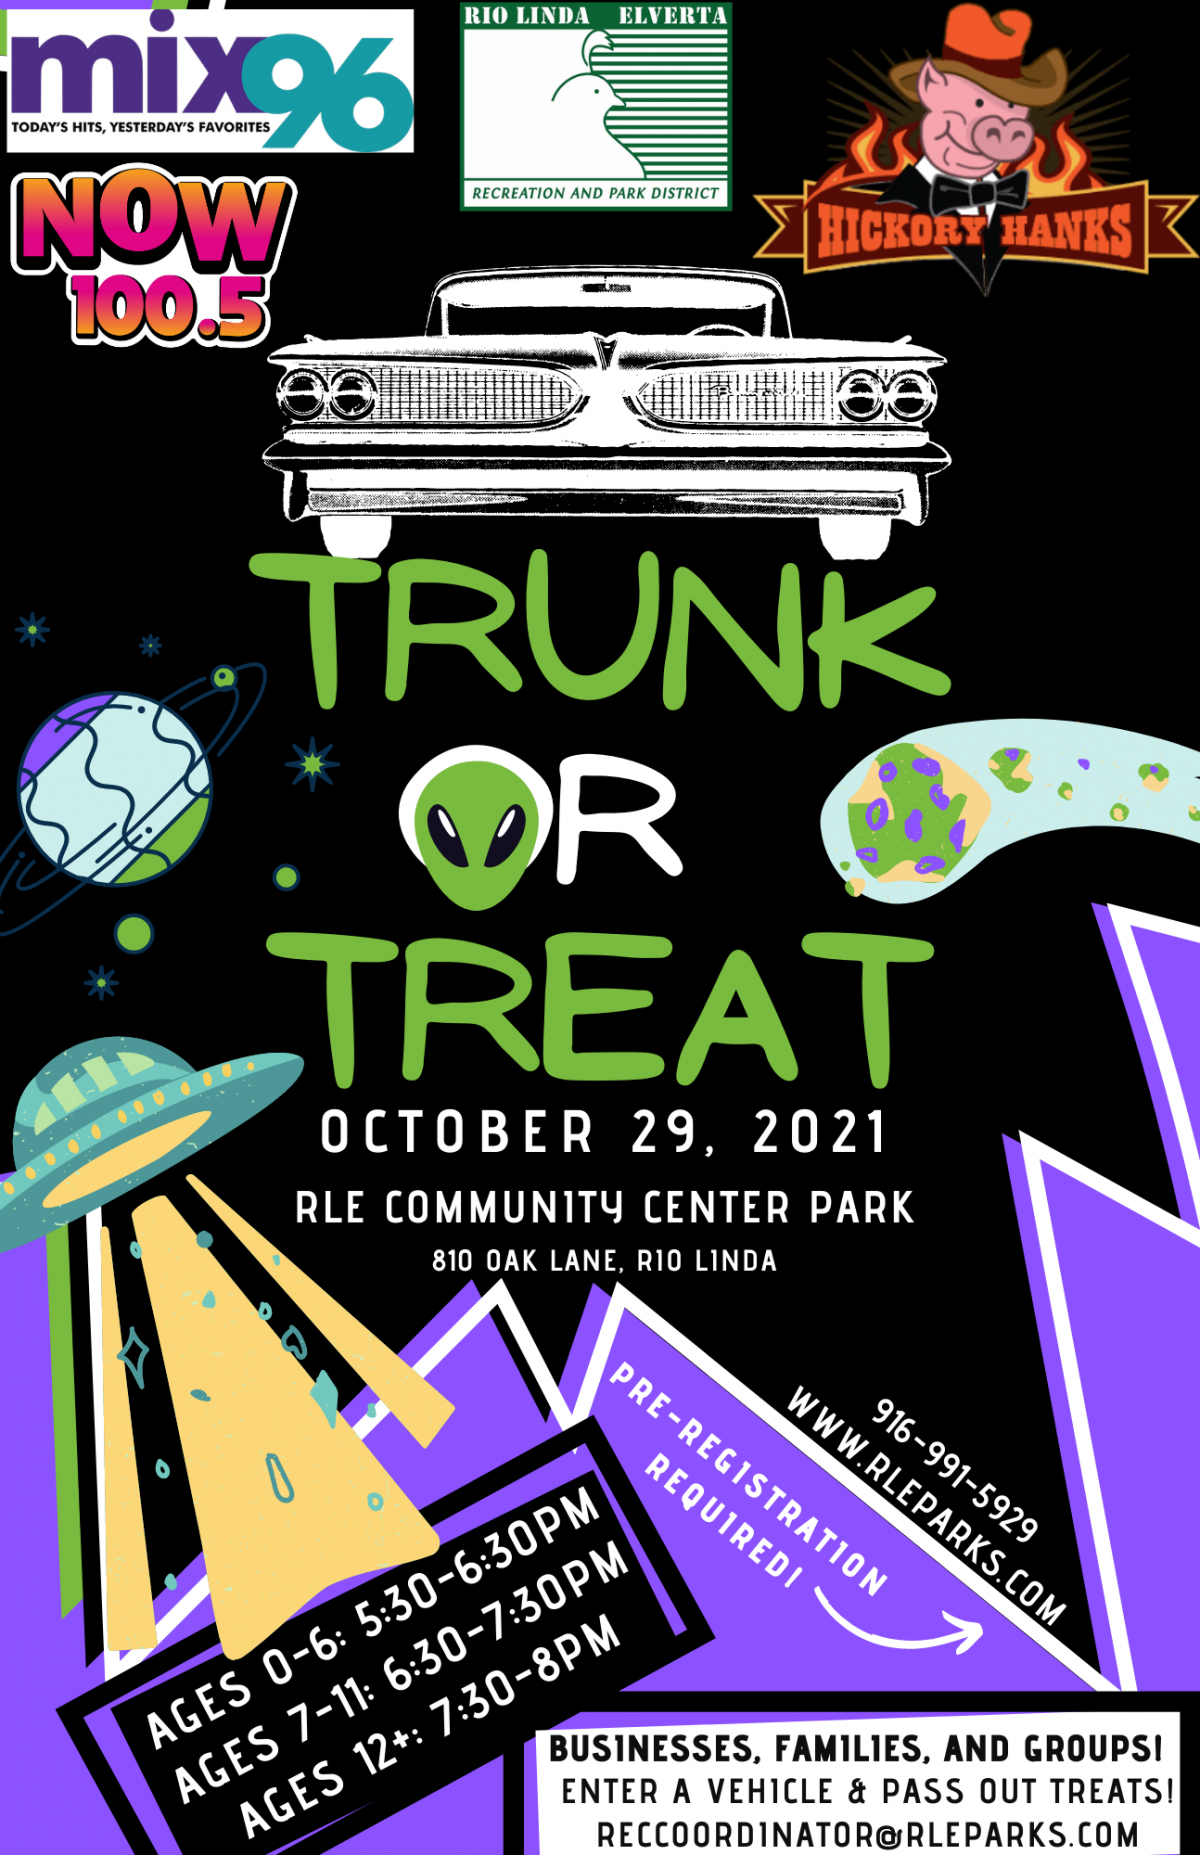 Trunk-or-Treat Halloween Event